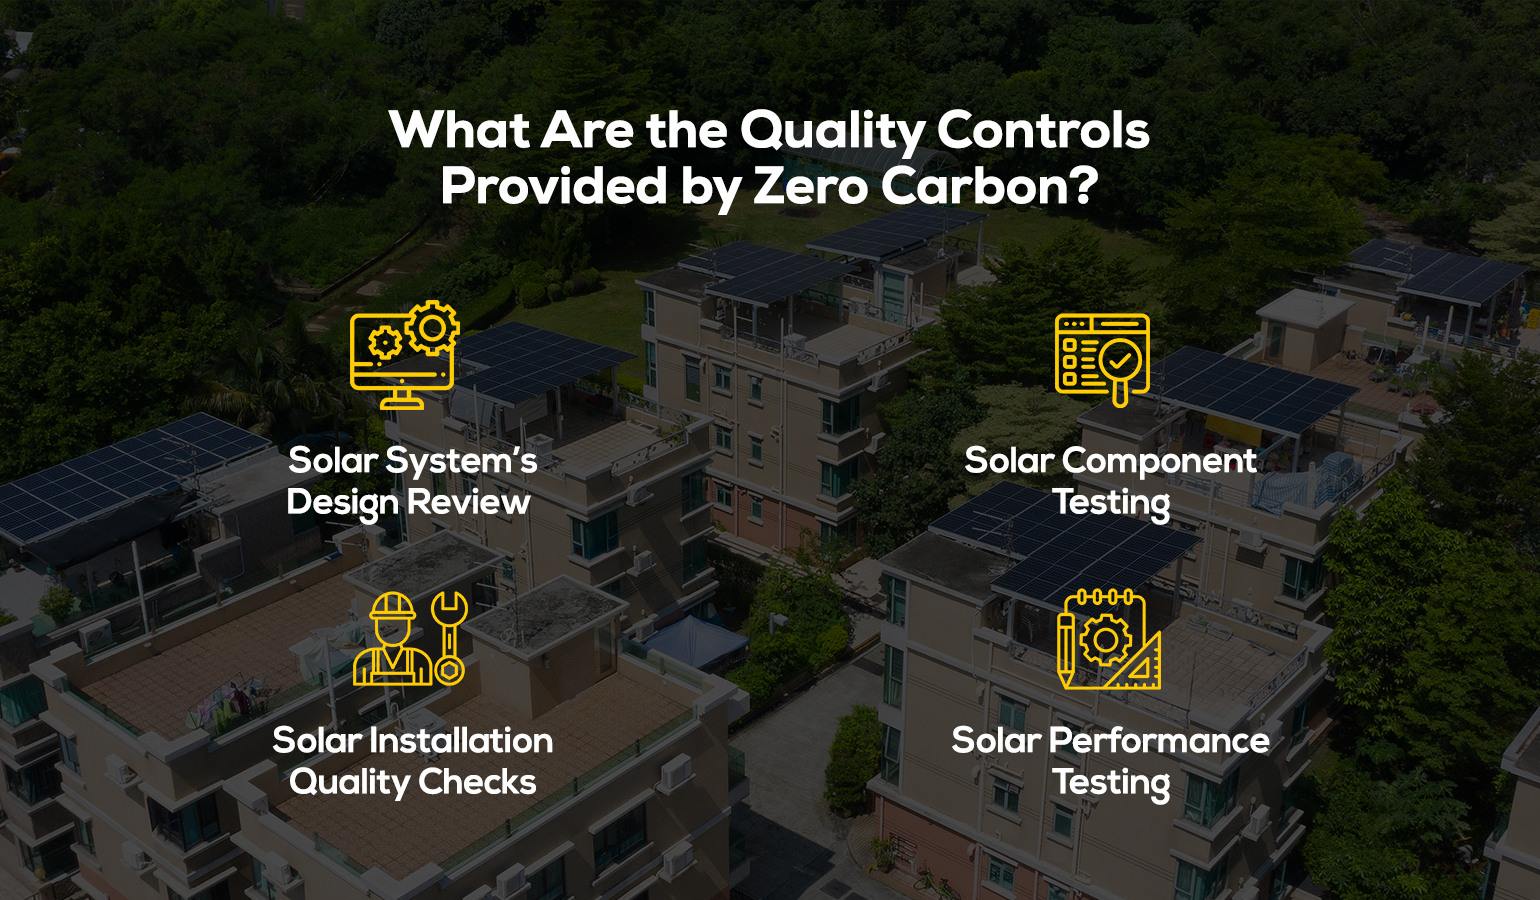 What Are the Quality Controls Provided by Zero Carbon? 